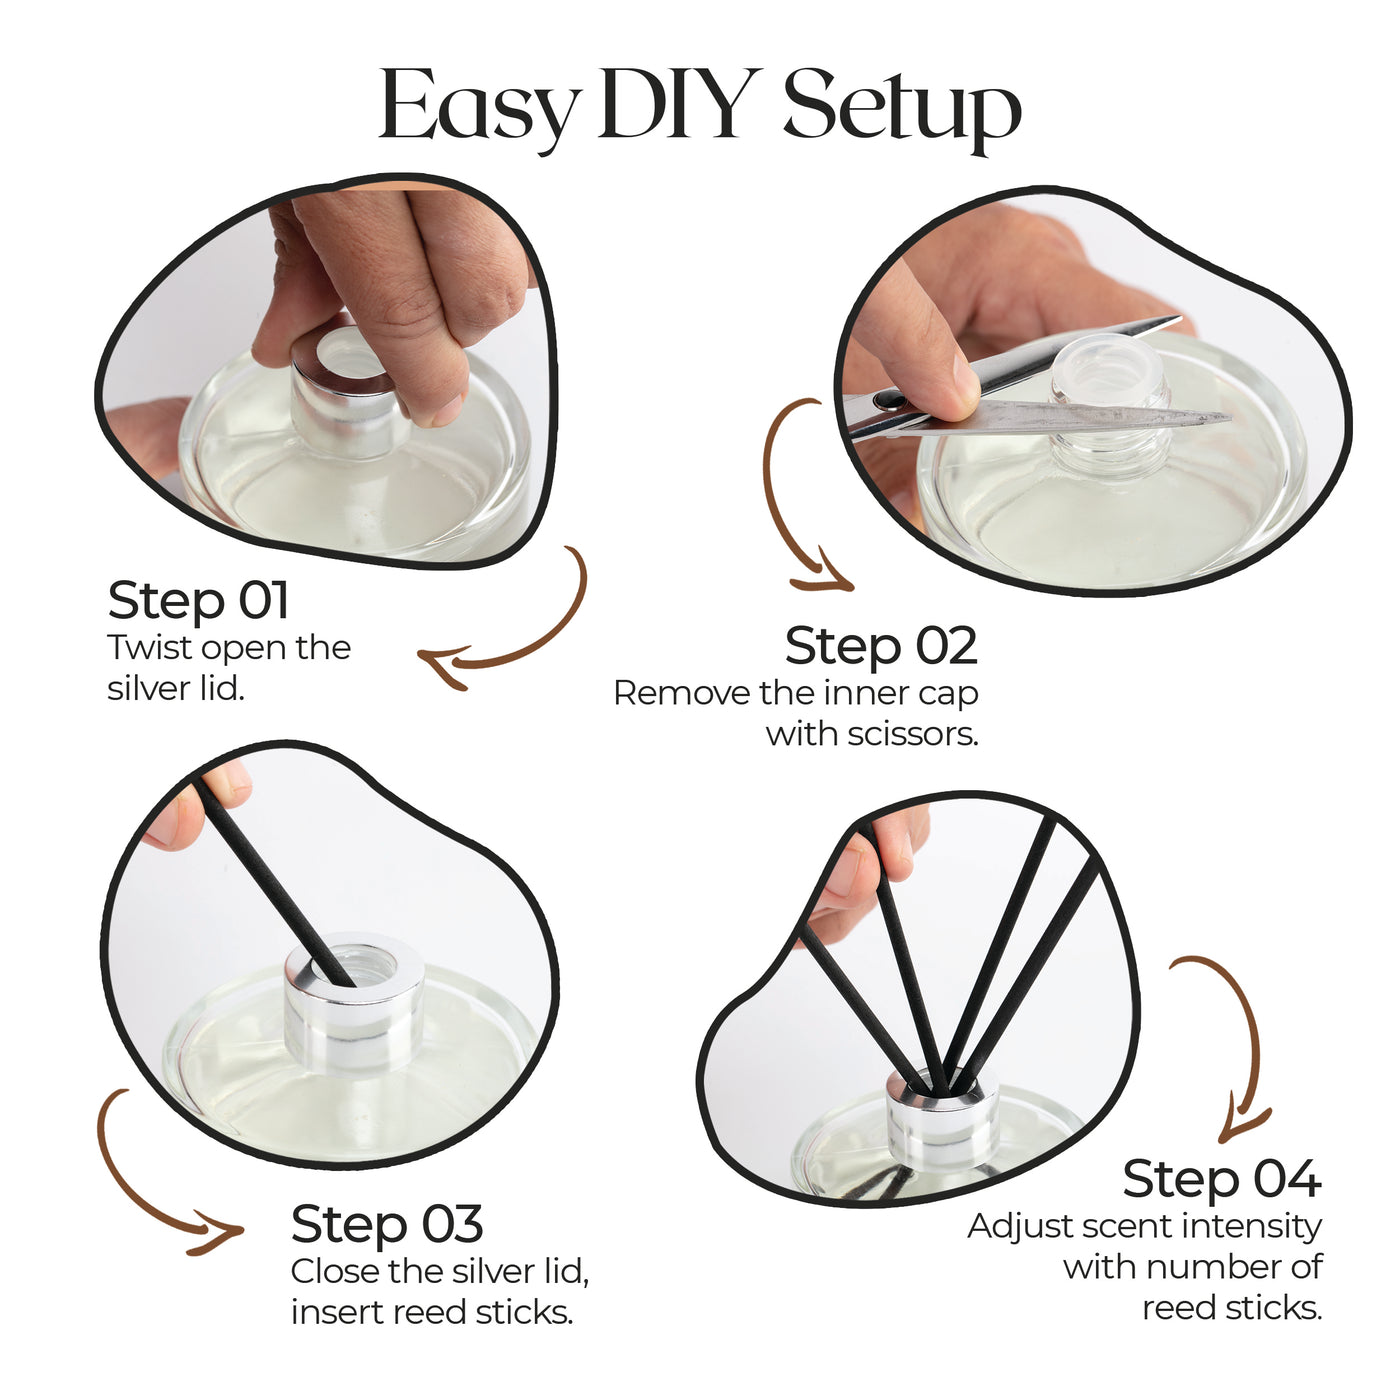 Step-by-step visual guide for setting up Sweet Memoir reed diffusers, showing bottle opening, reed insertion, and scent diffusion.